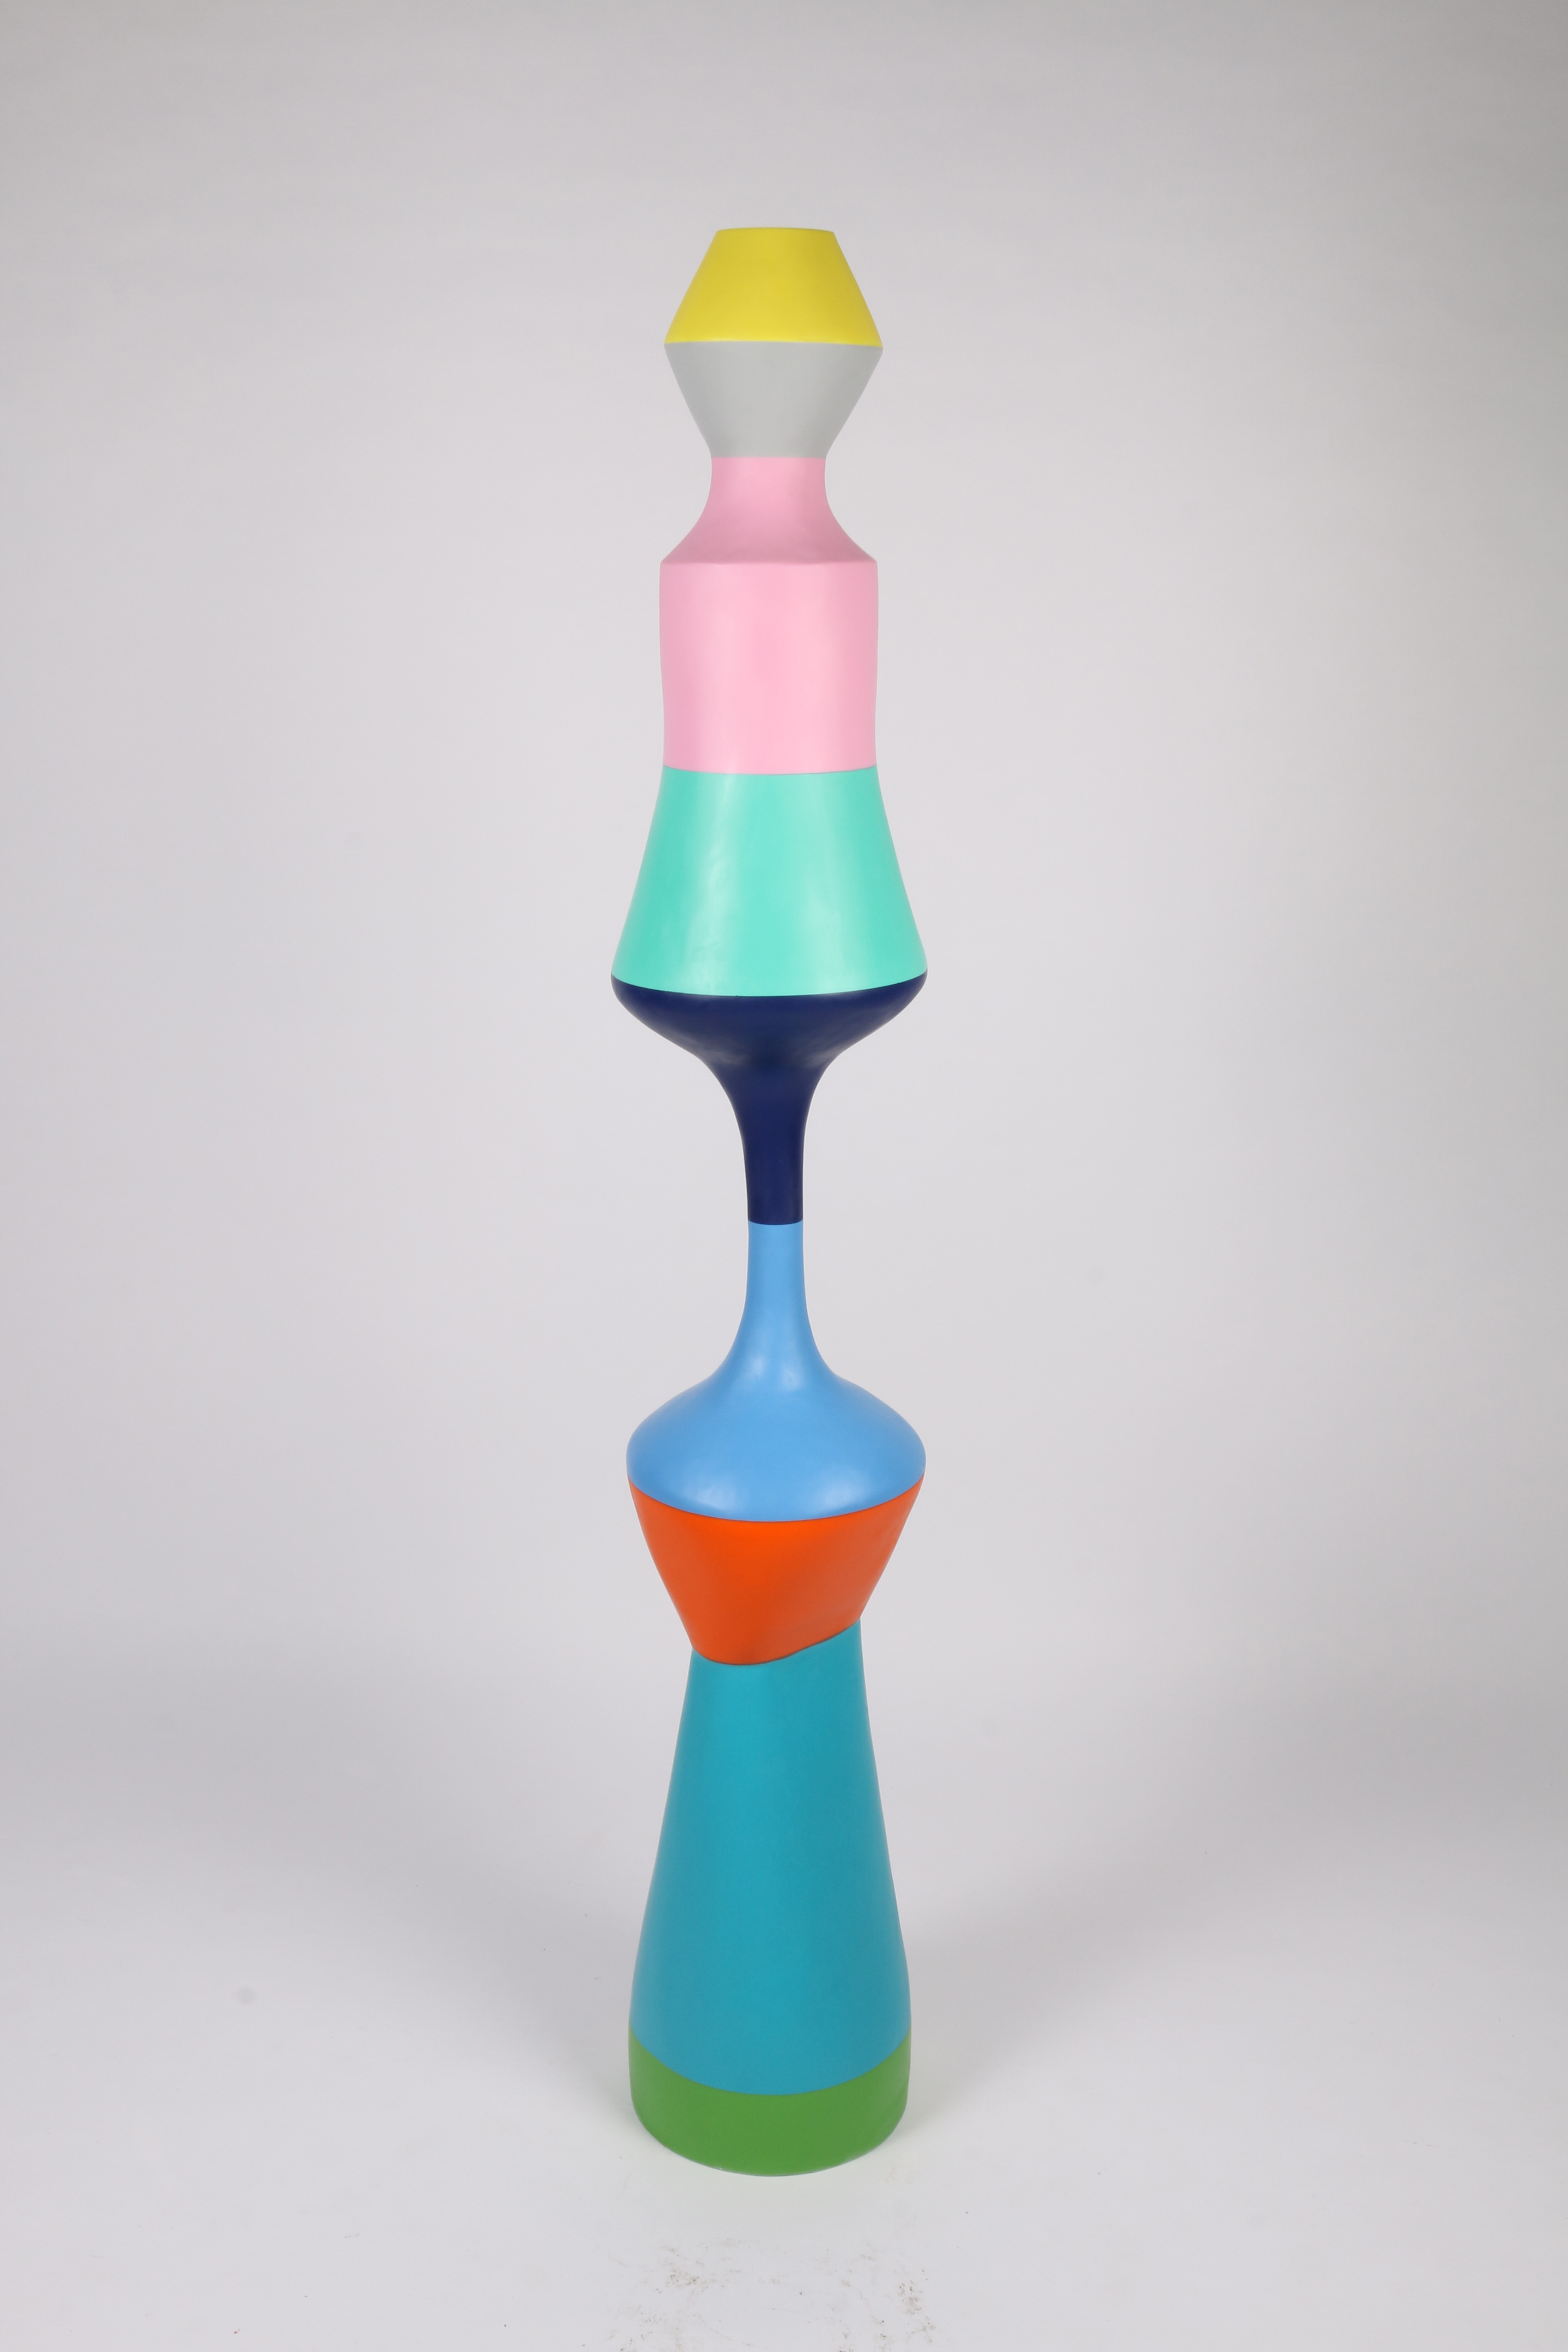 Totem 23 by Stephen Ormandy at Olsen Gallery